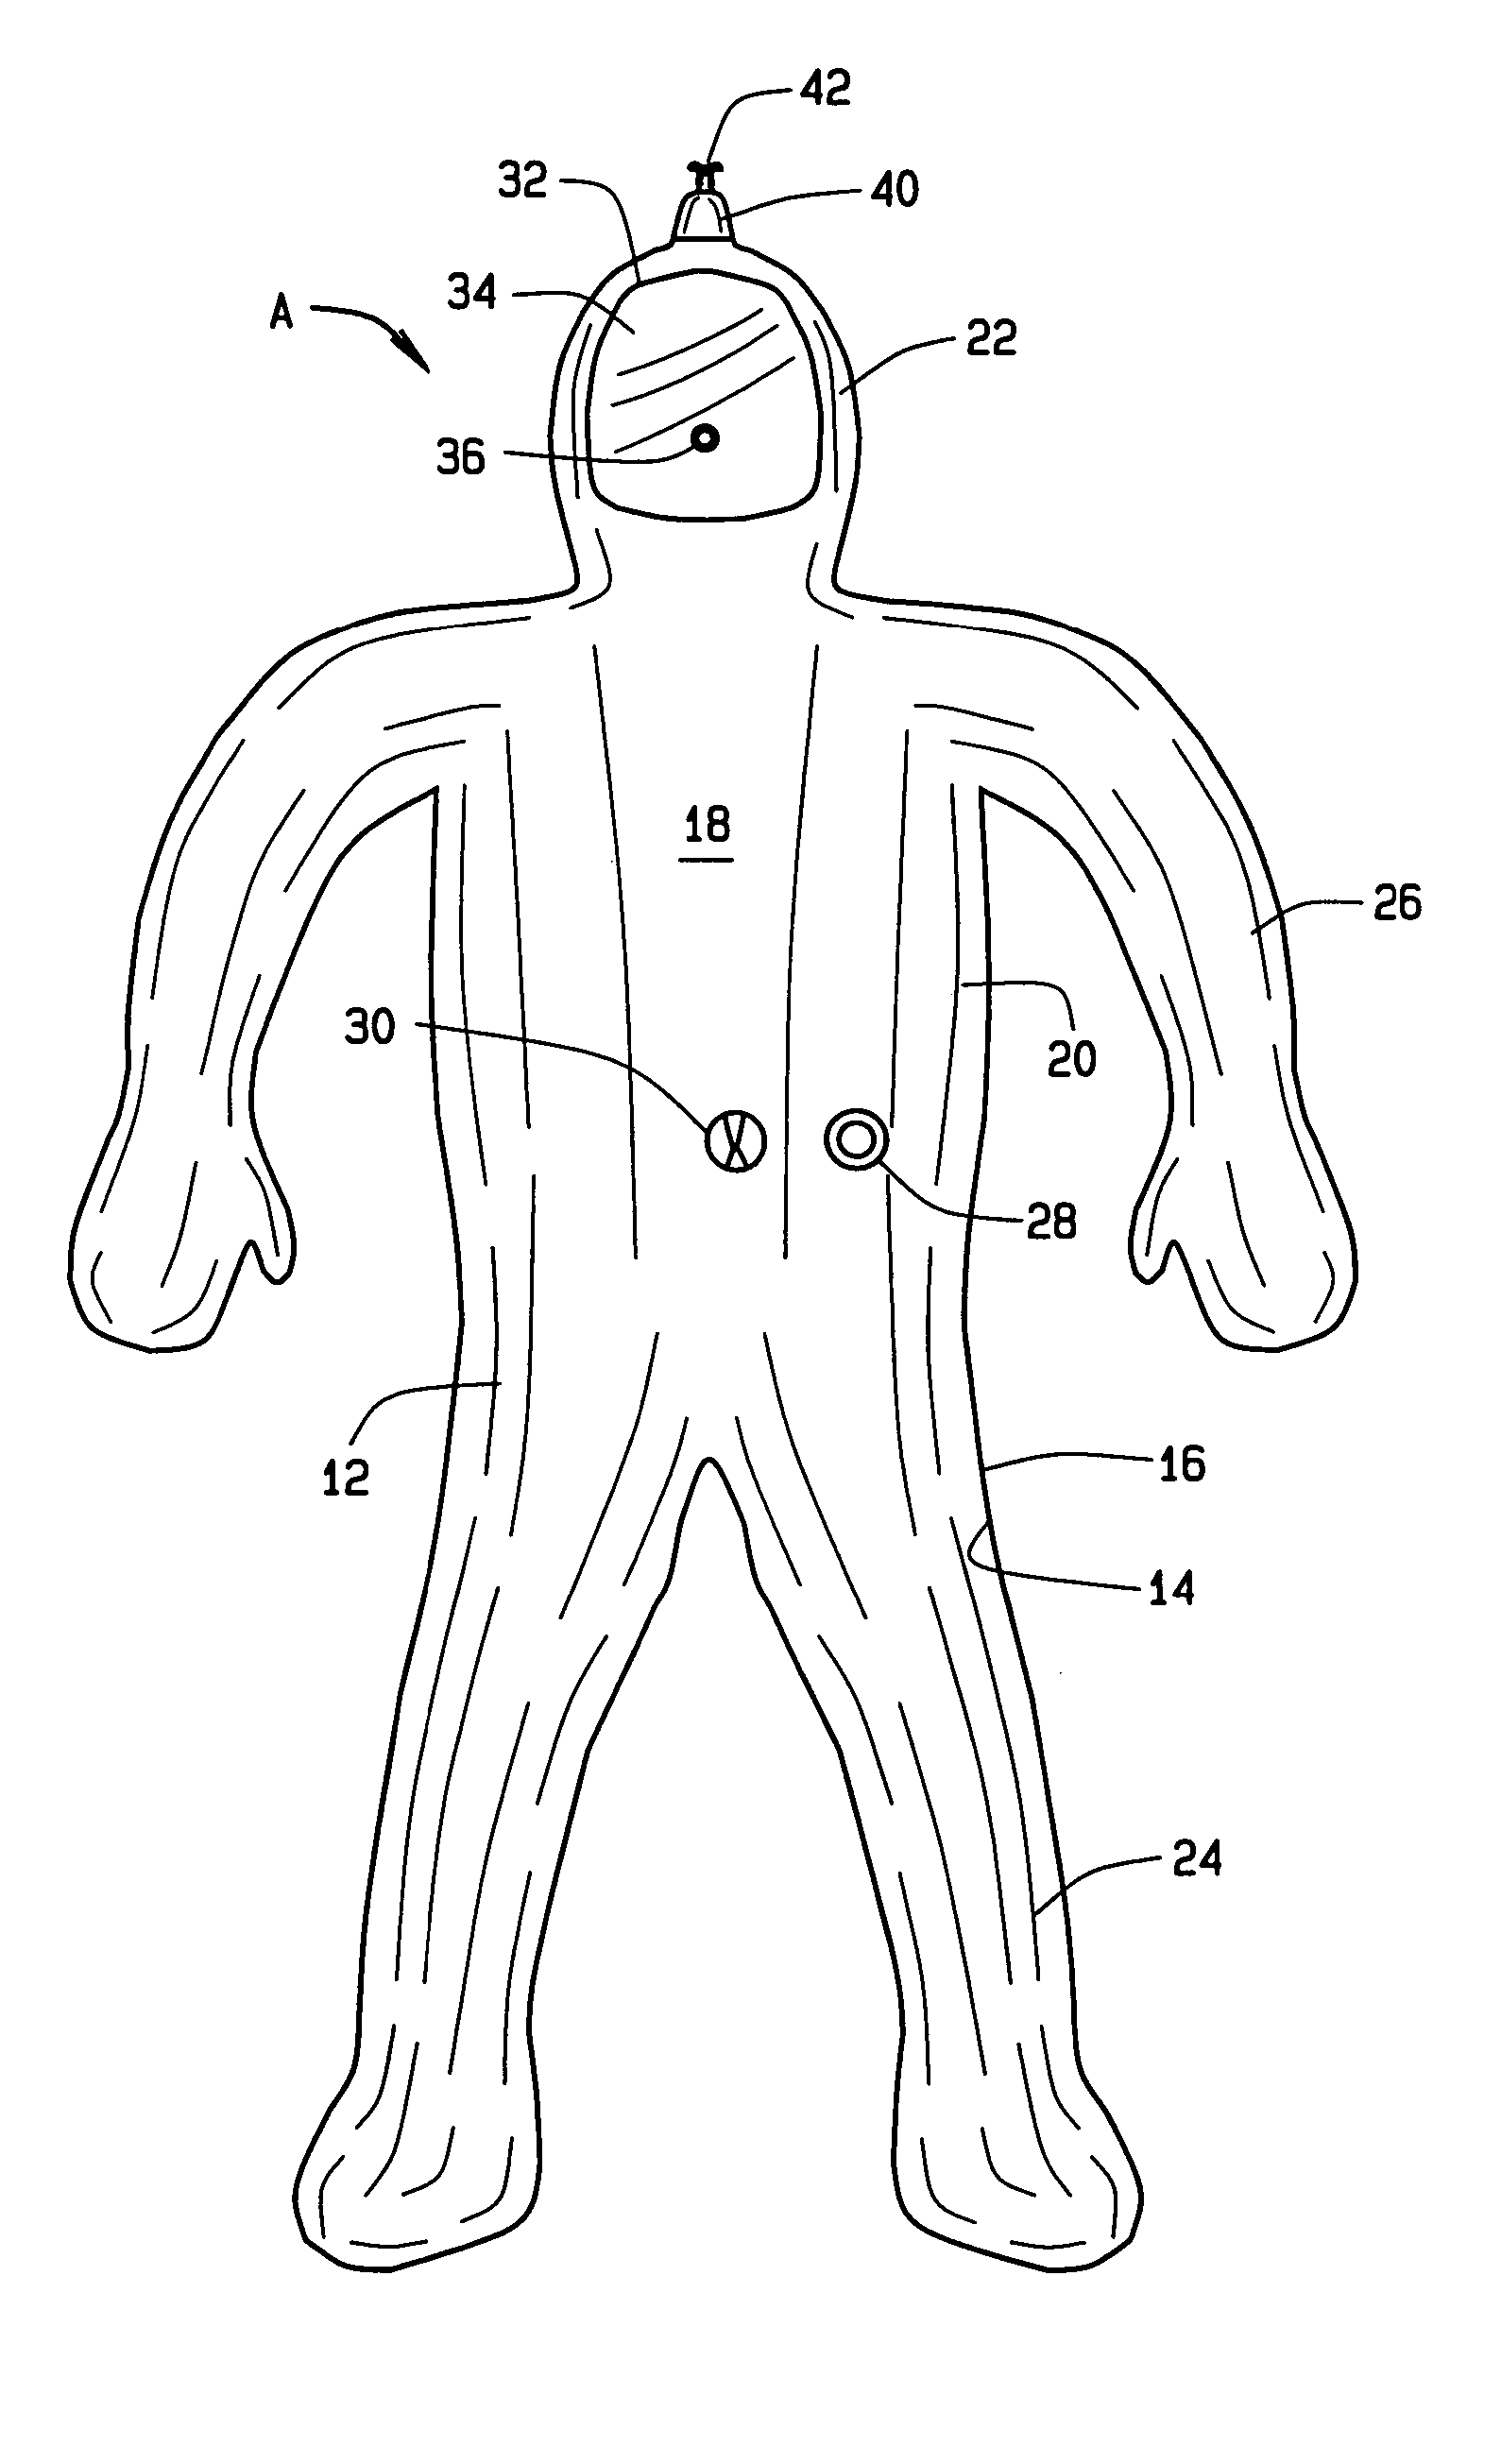 Body volume measurement apparatus and method of measuring the body volume of a person